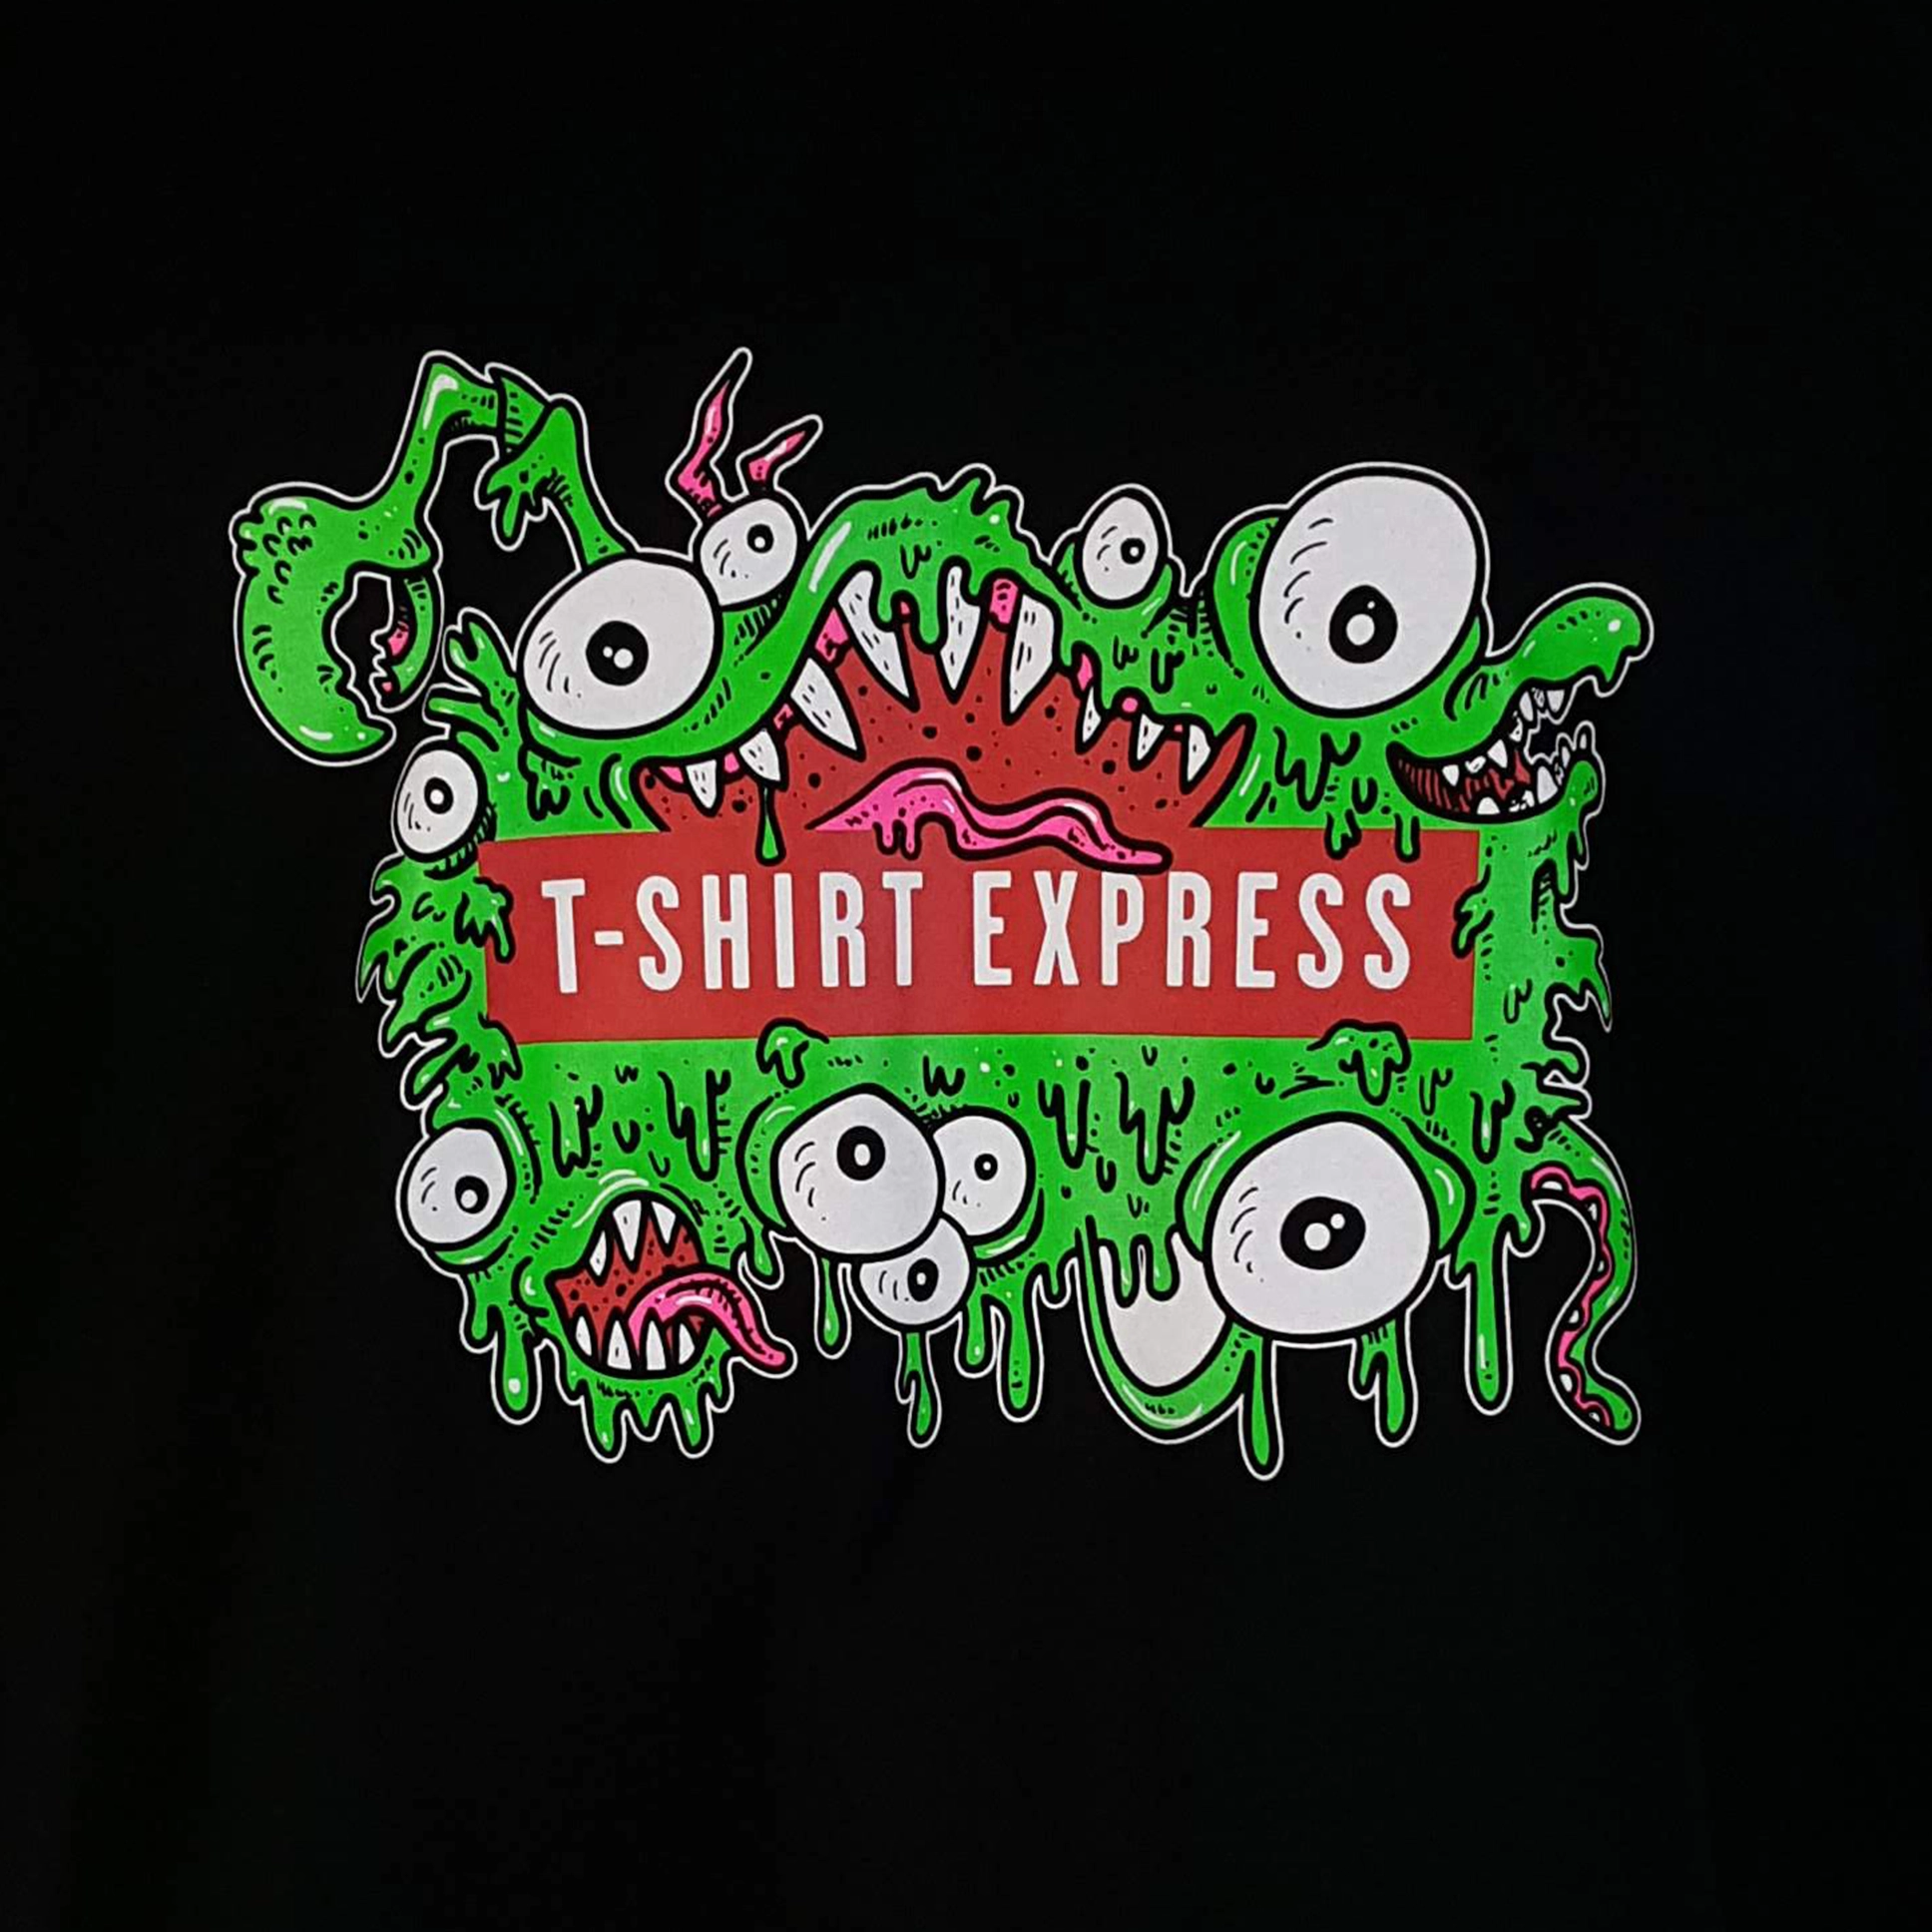 t-shirt express in Knox ohio